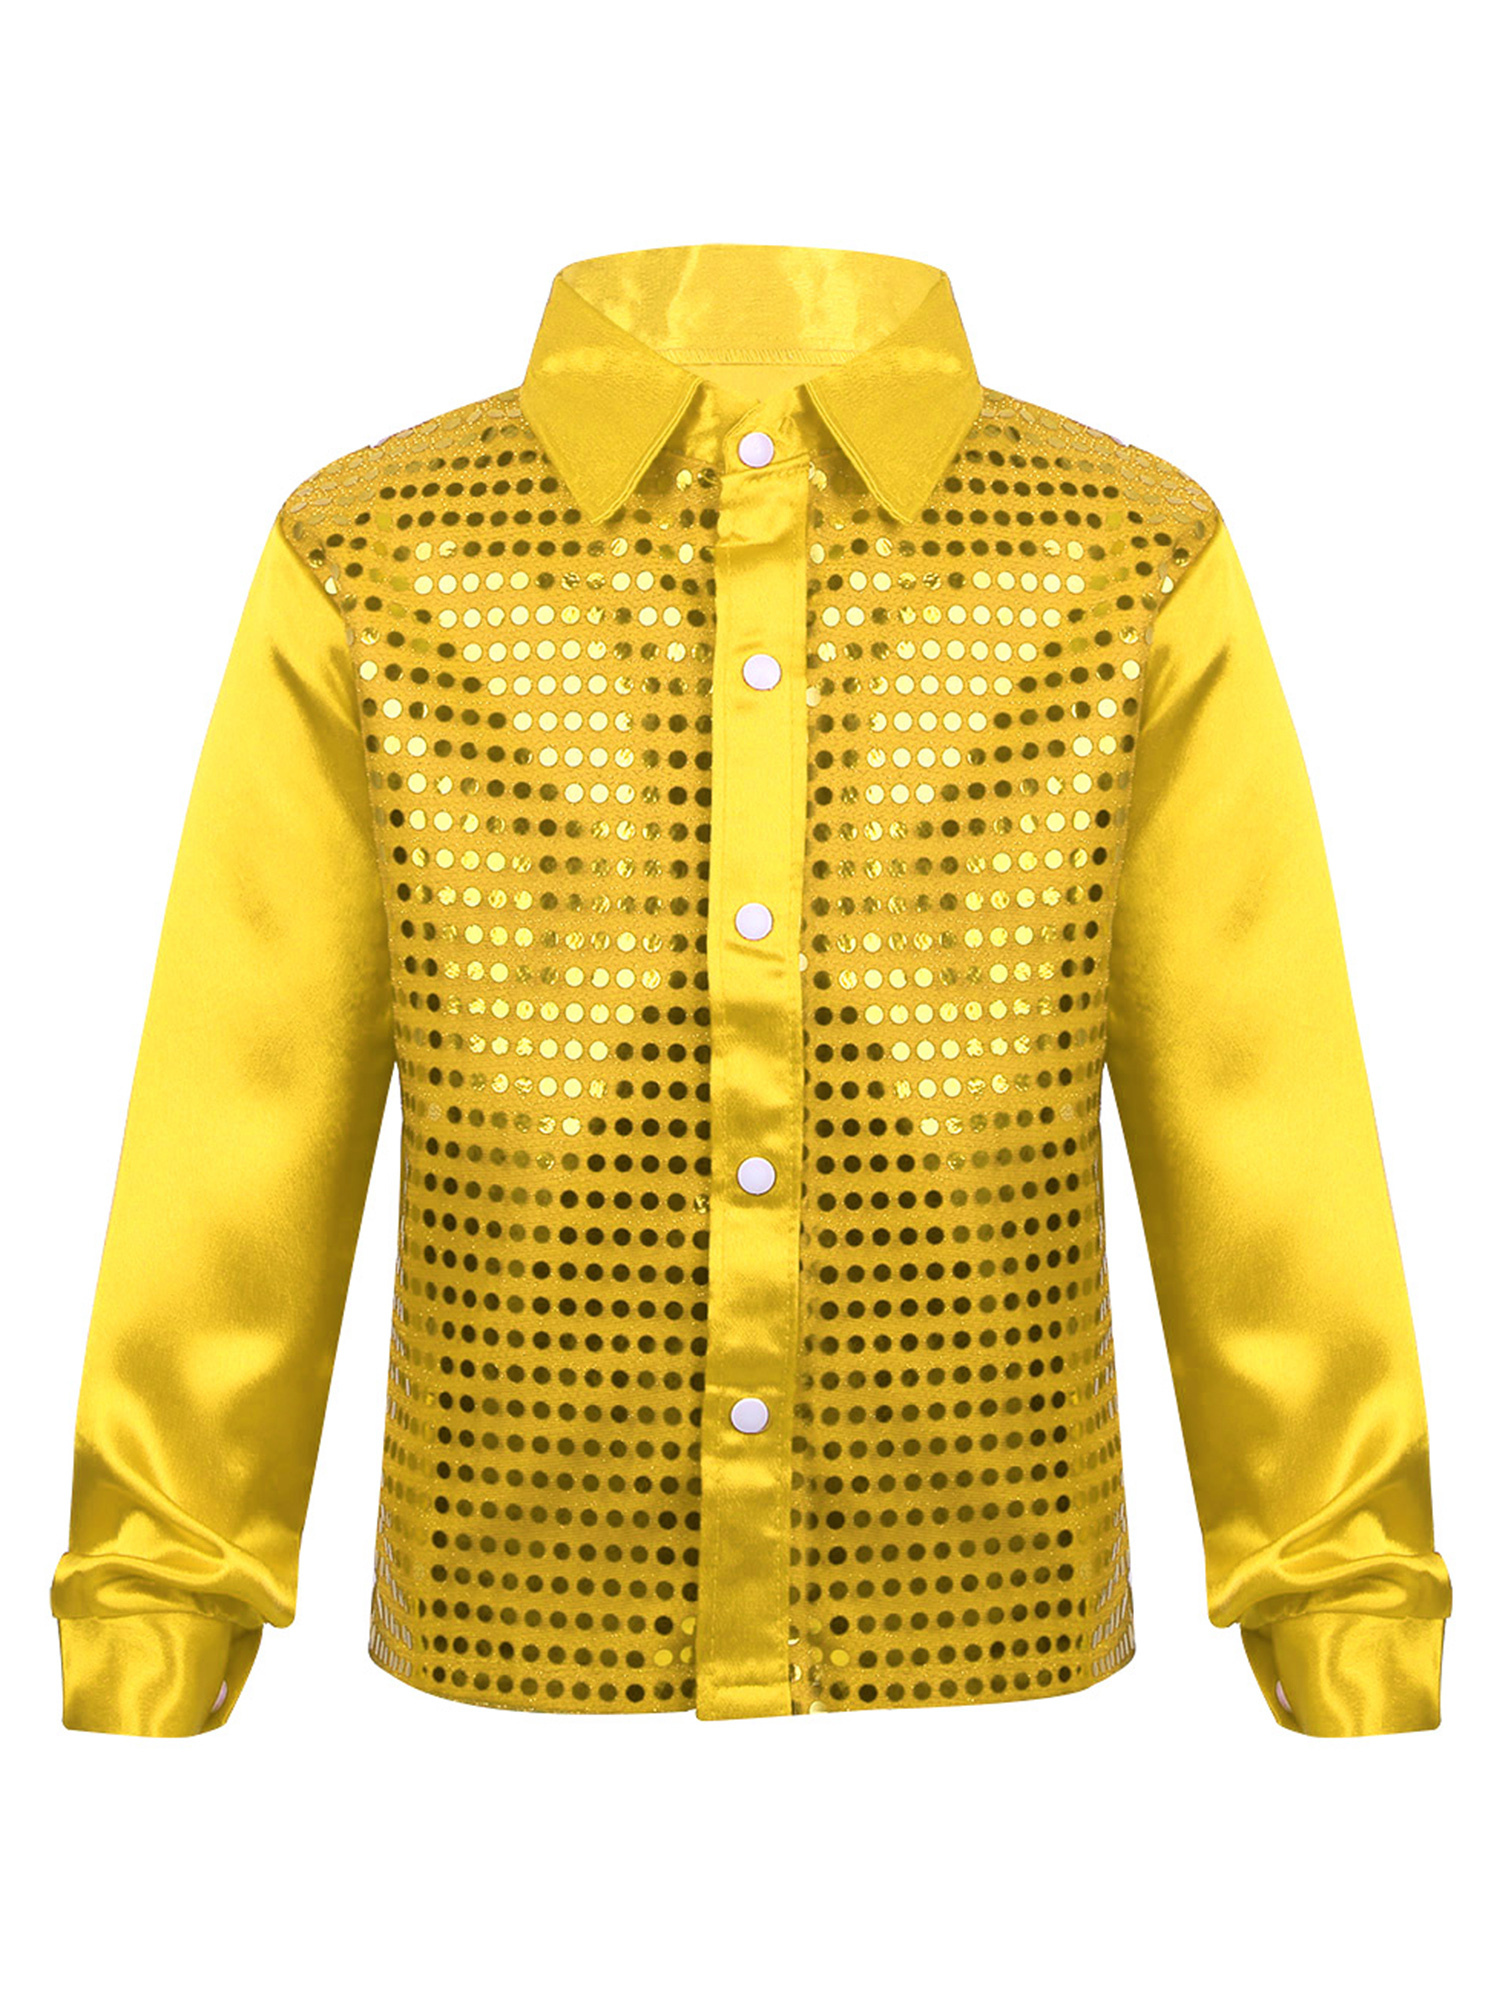 YEAHDOR Kids Boys Sparkly Sequins Lapel Collar Shirt Long Sleeve Tops for Jazz Latin Dance Performance Gold 110 - image 1 of 6